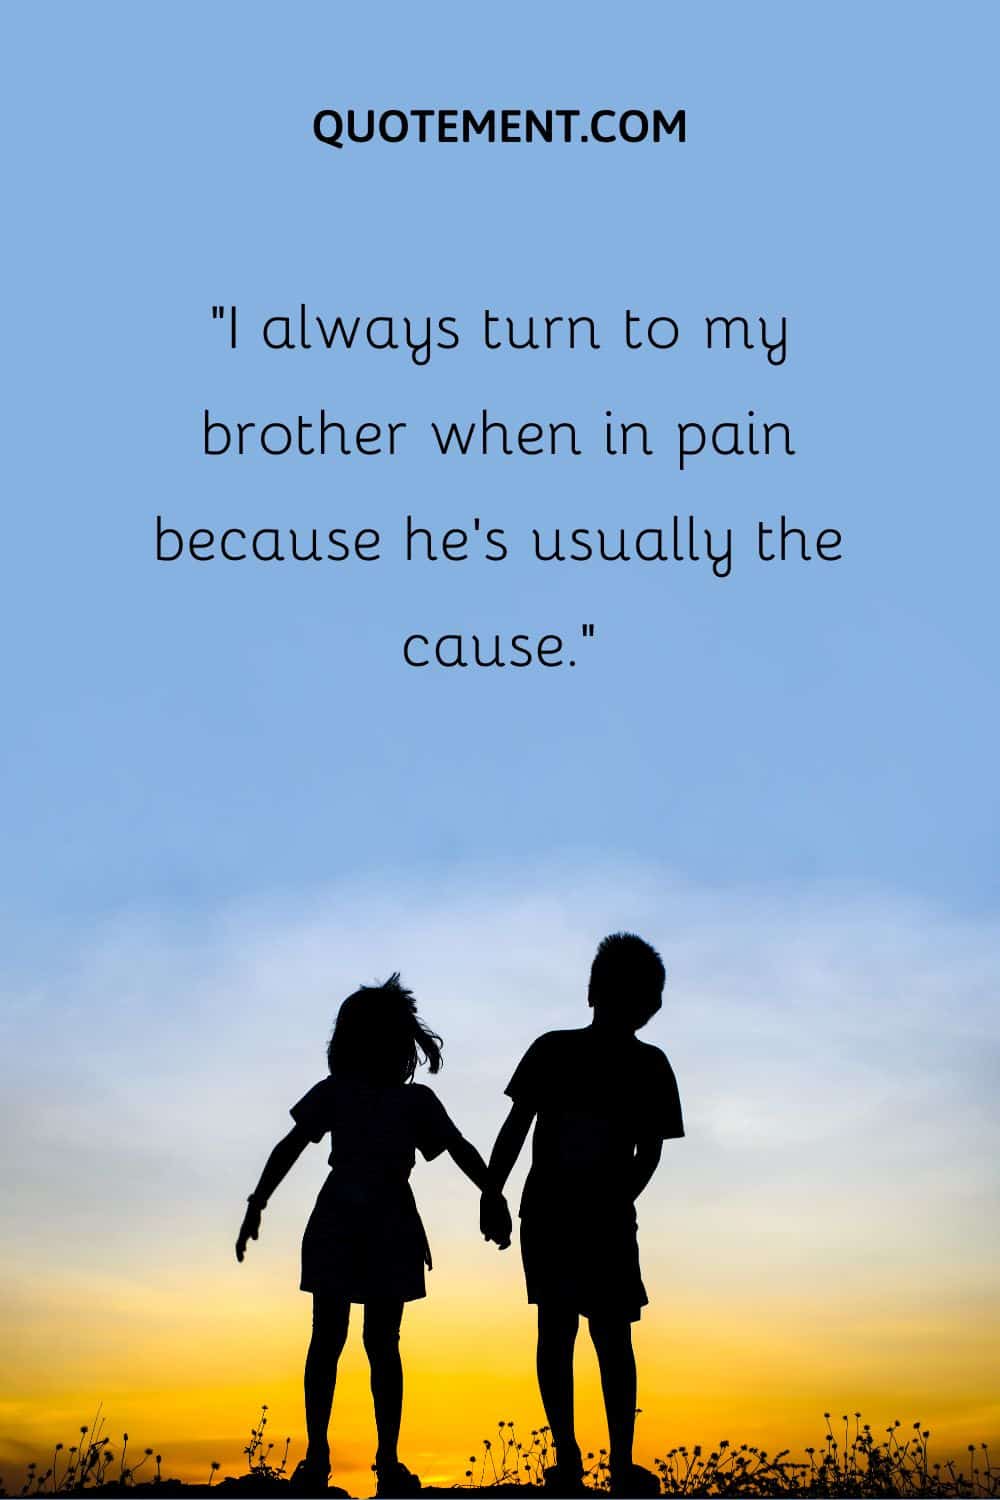 “I always turn to my brother when in pain because he’s usually the cause.”